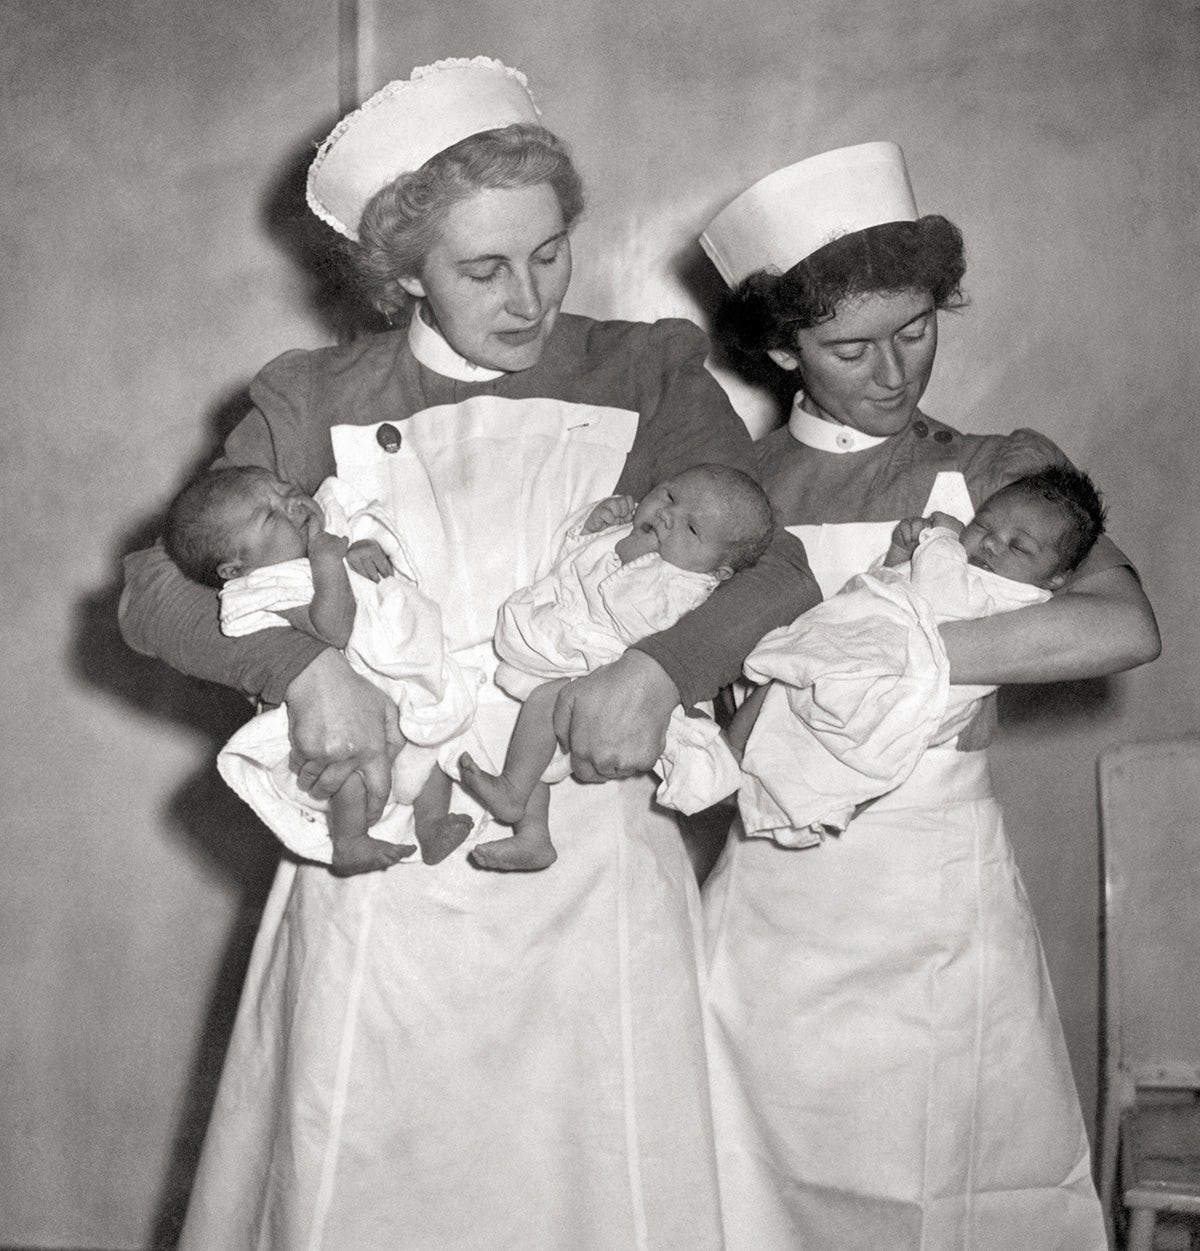 Black and white photograph of two nurses looking down at three babies as they hold them